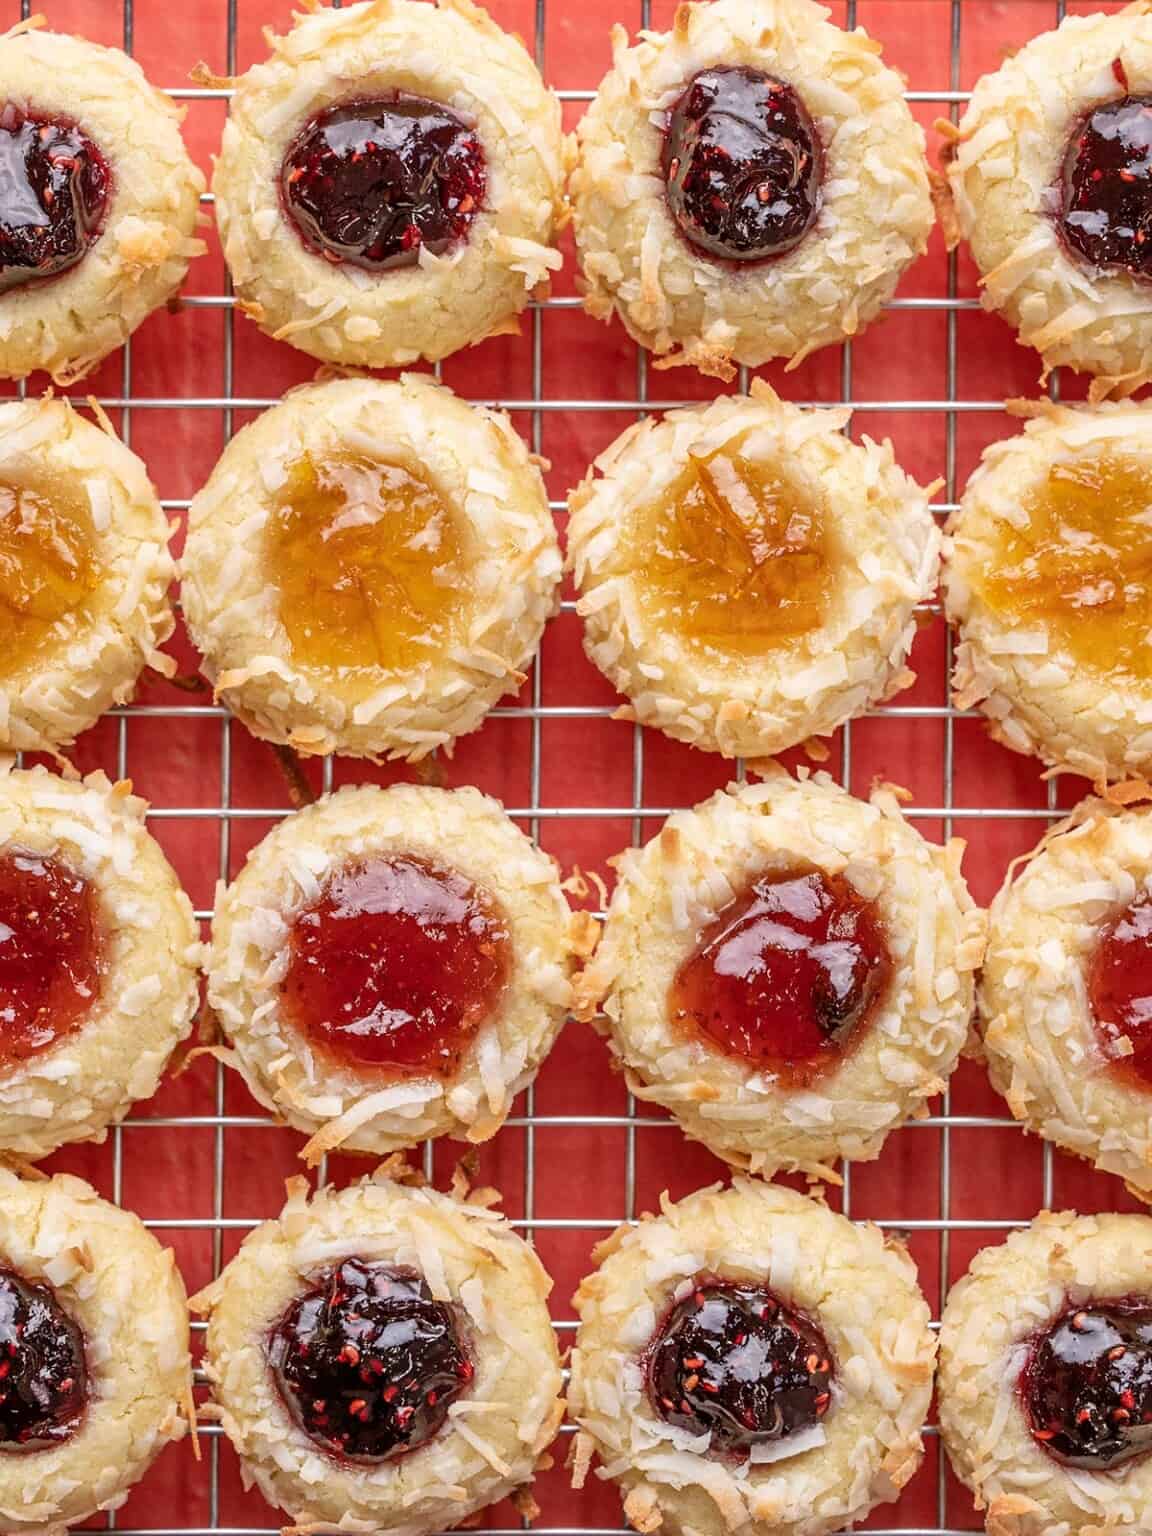 One of my all-time favorite holiday treats is jam thumbprint cookies. Do I apply that statement to all cookies?